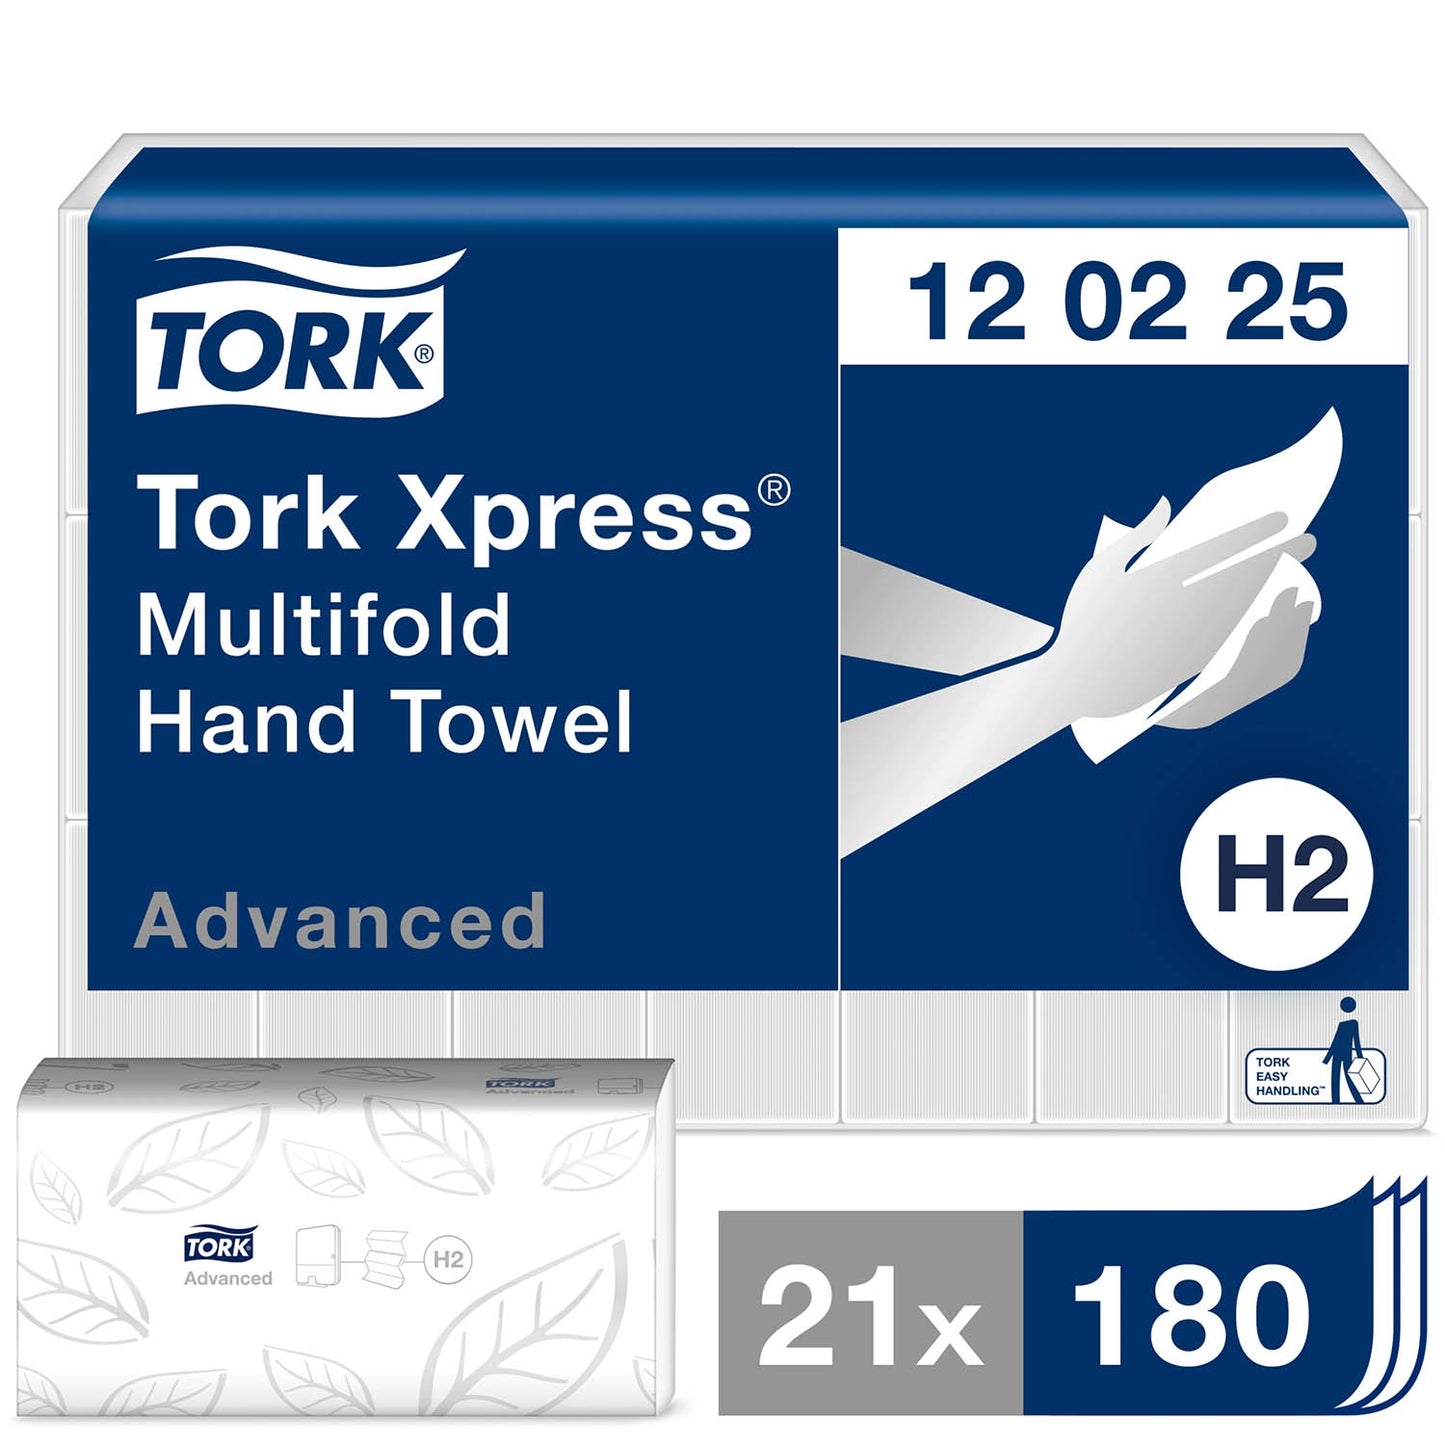 Tork Xpress Multifold Hand Towel White 2Ply - 120225 - Case of 21 x 180m - 3780 Towels